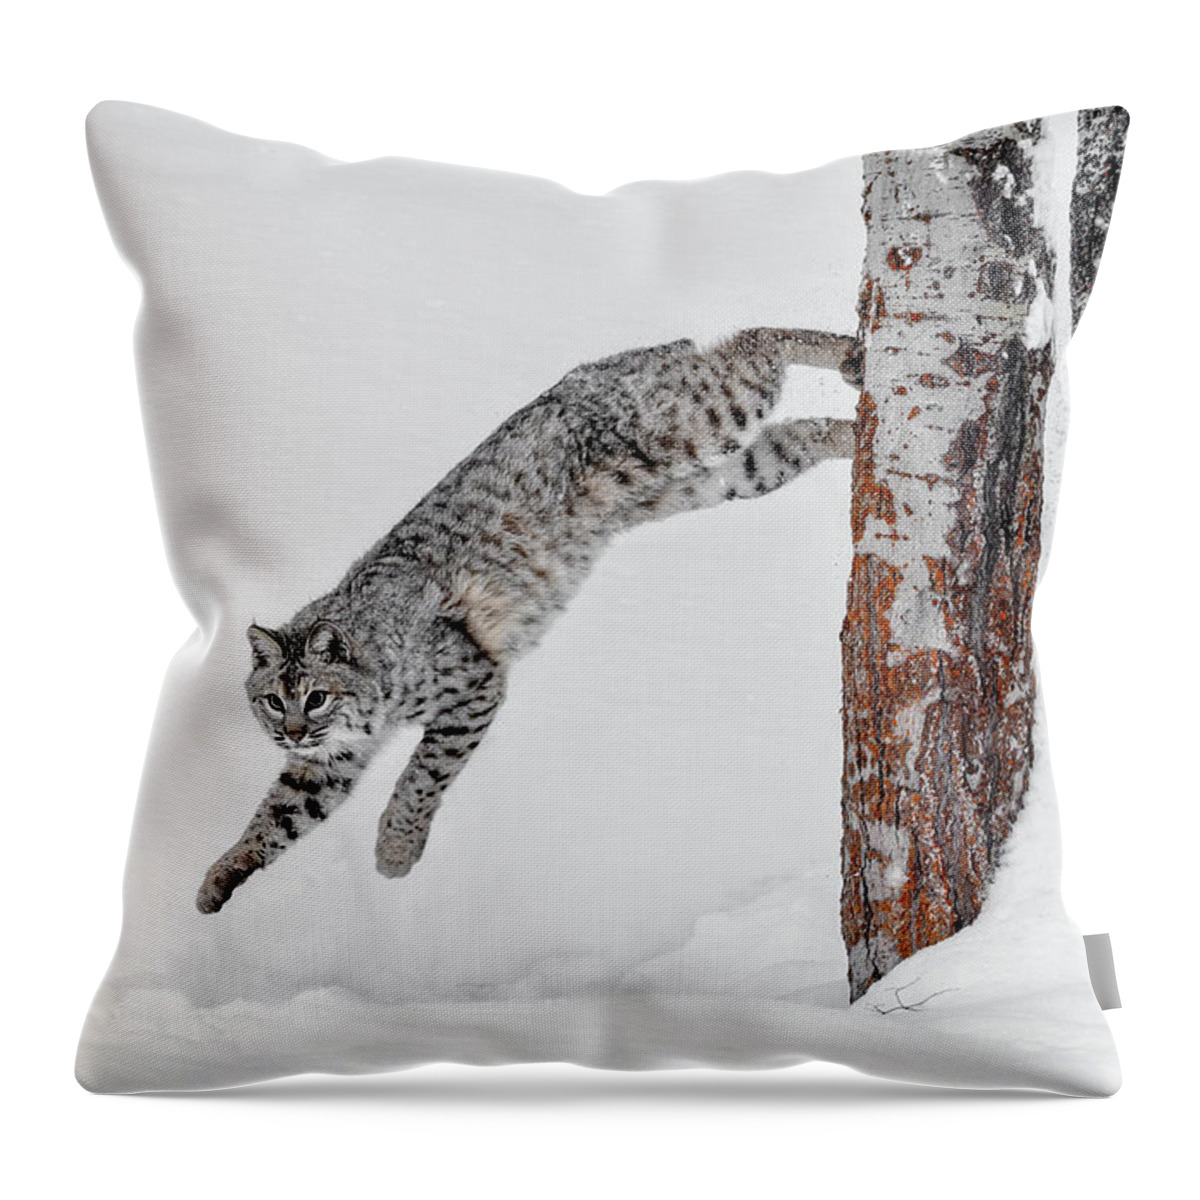 Leapin Bobcat Throw Pillow featuring the photograph Leapin Bobcat by Wes and Dotty Weber